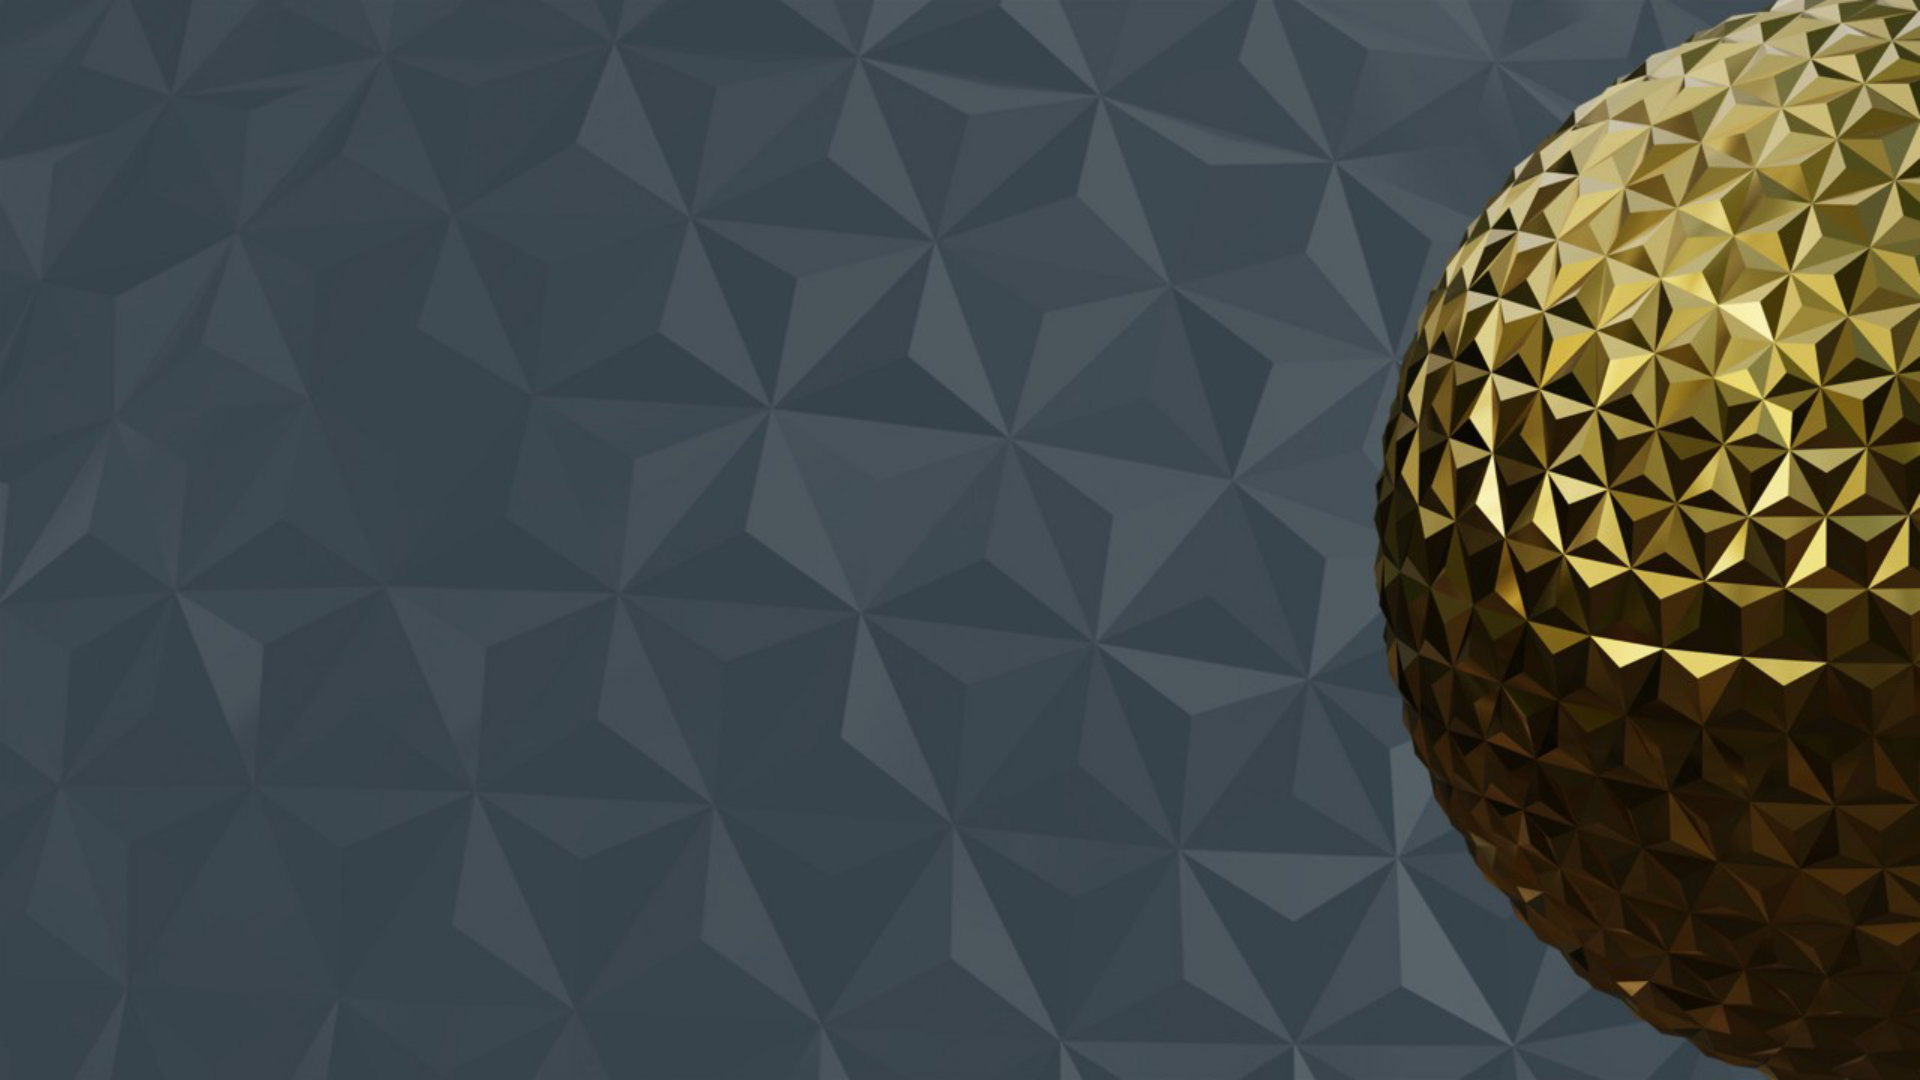 RICS Awards campaign image with dark grey geometric pattern and golden geometric ball overlayed